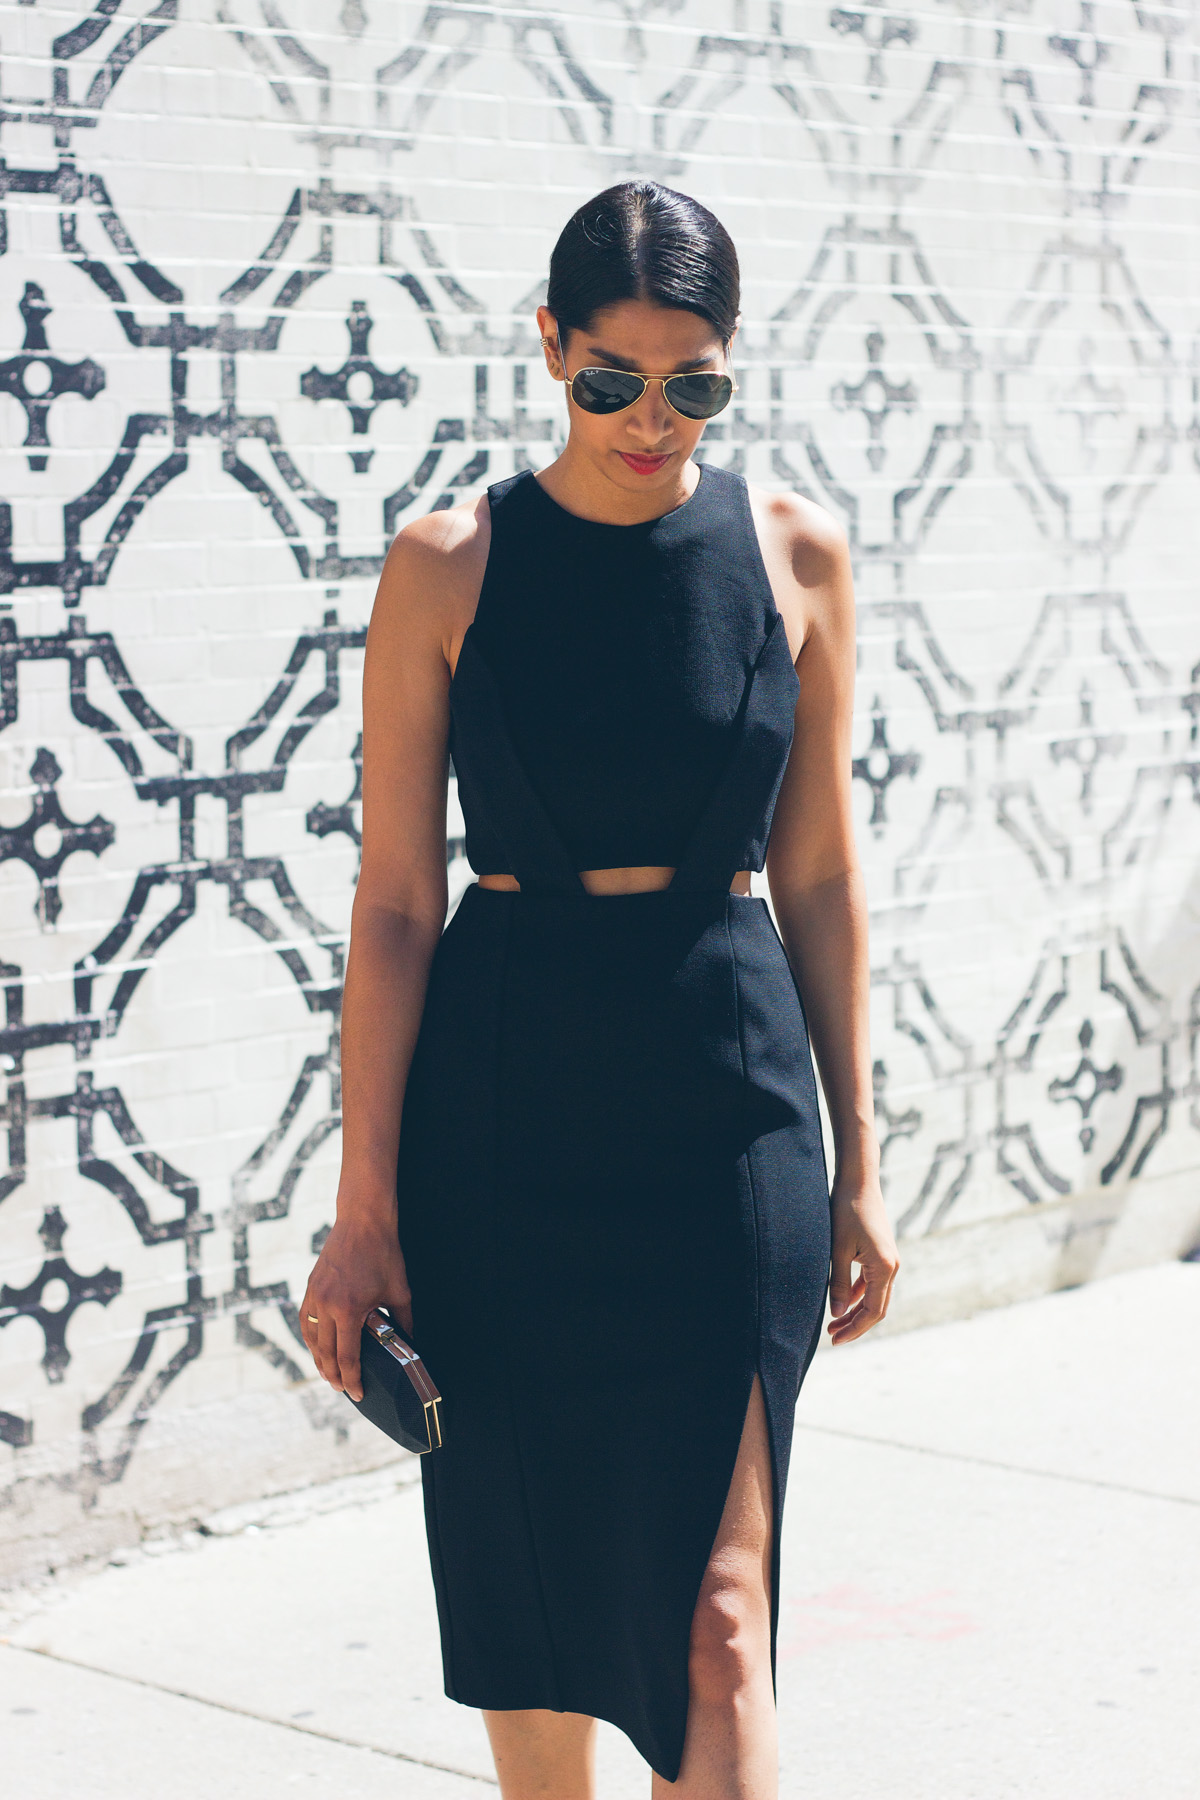 The Dress That Is Cut Out Perfection | Lows to Luxe